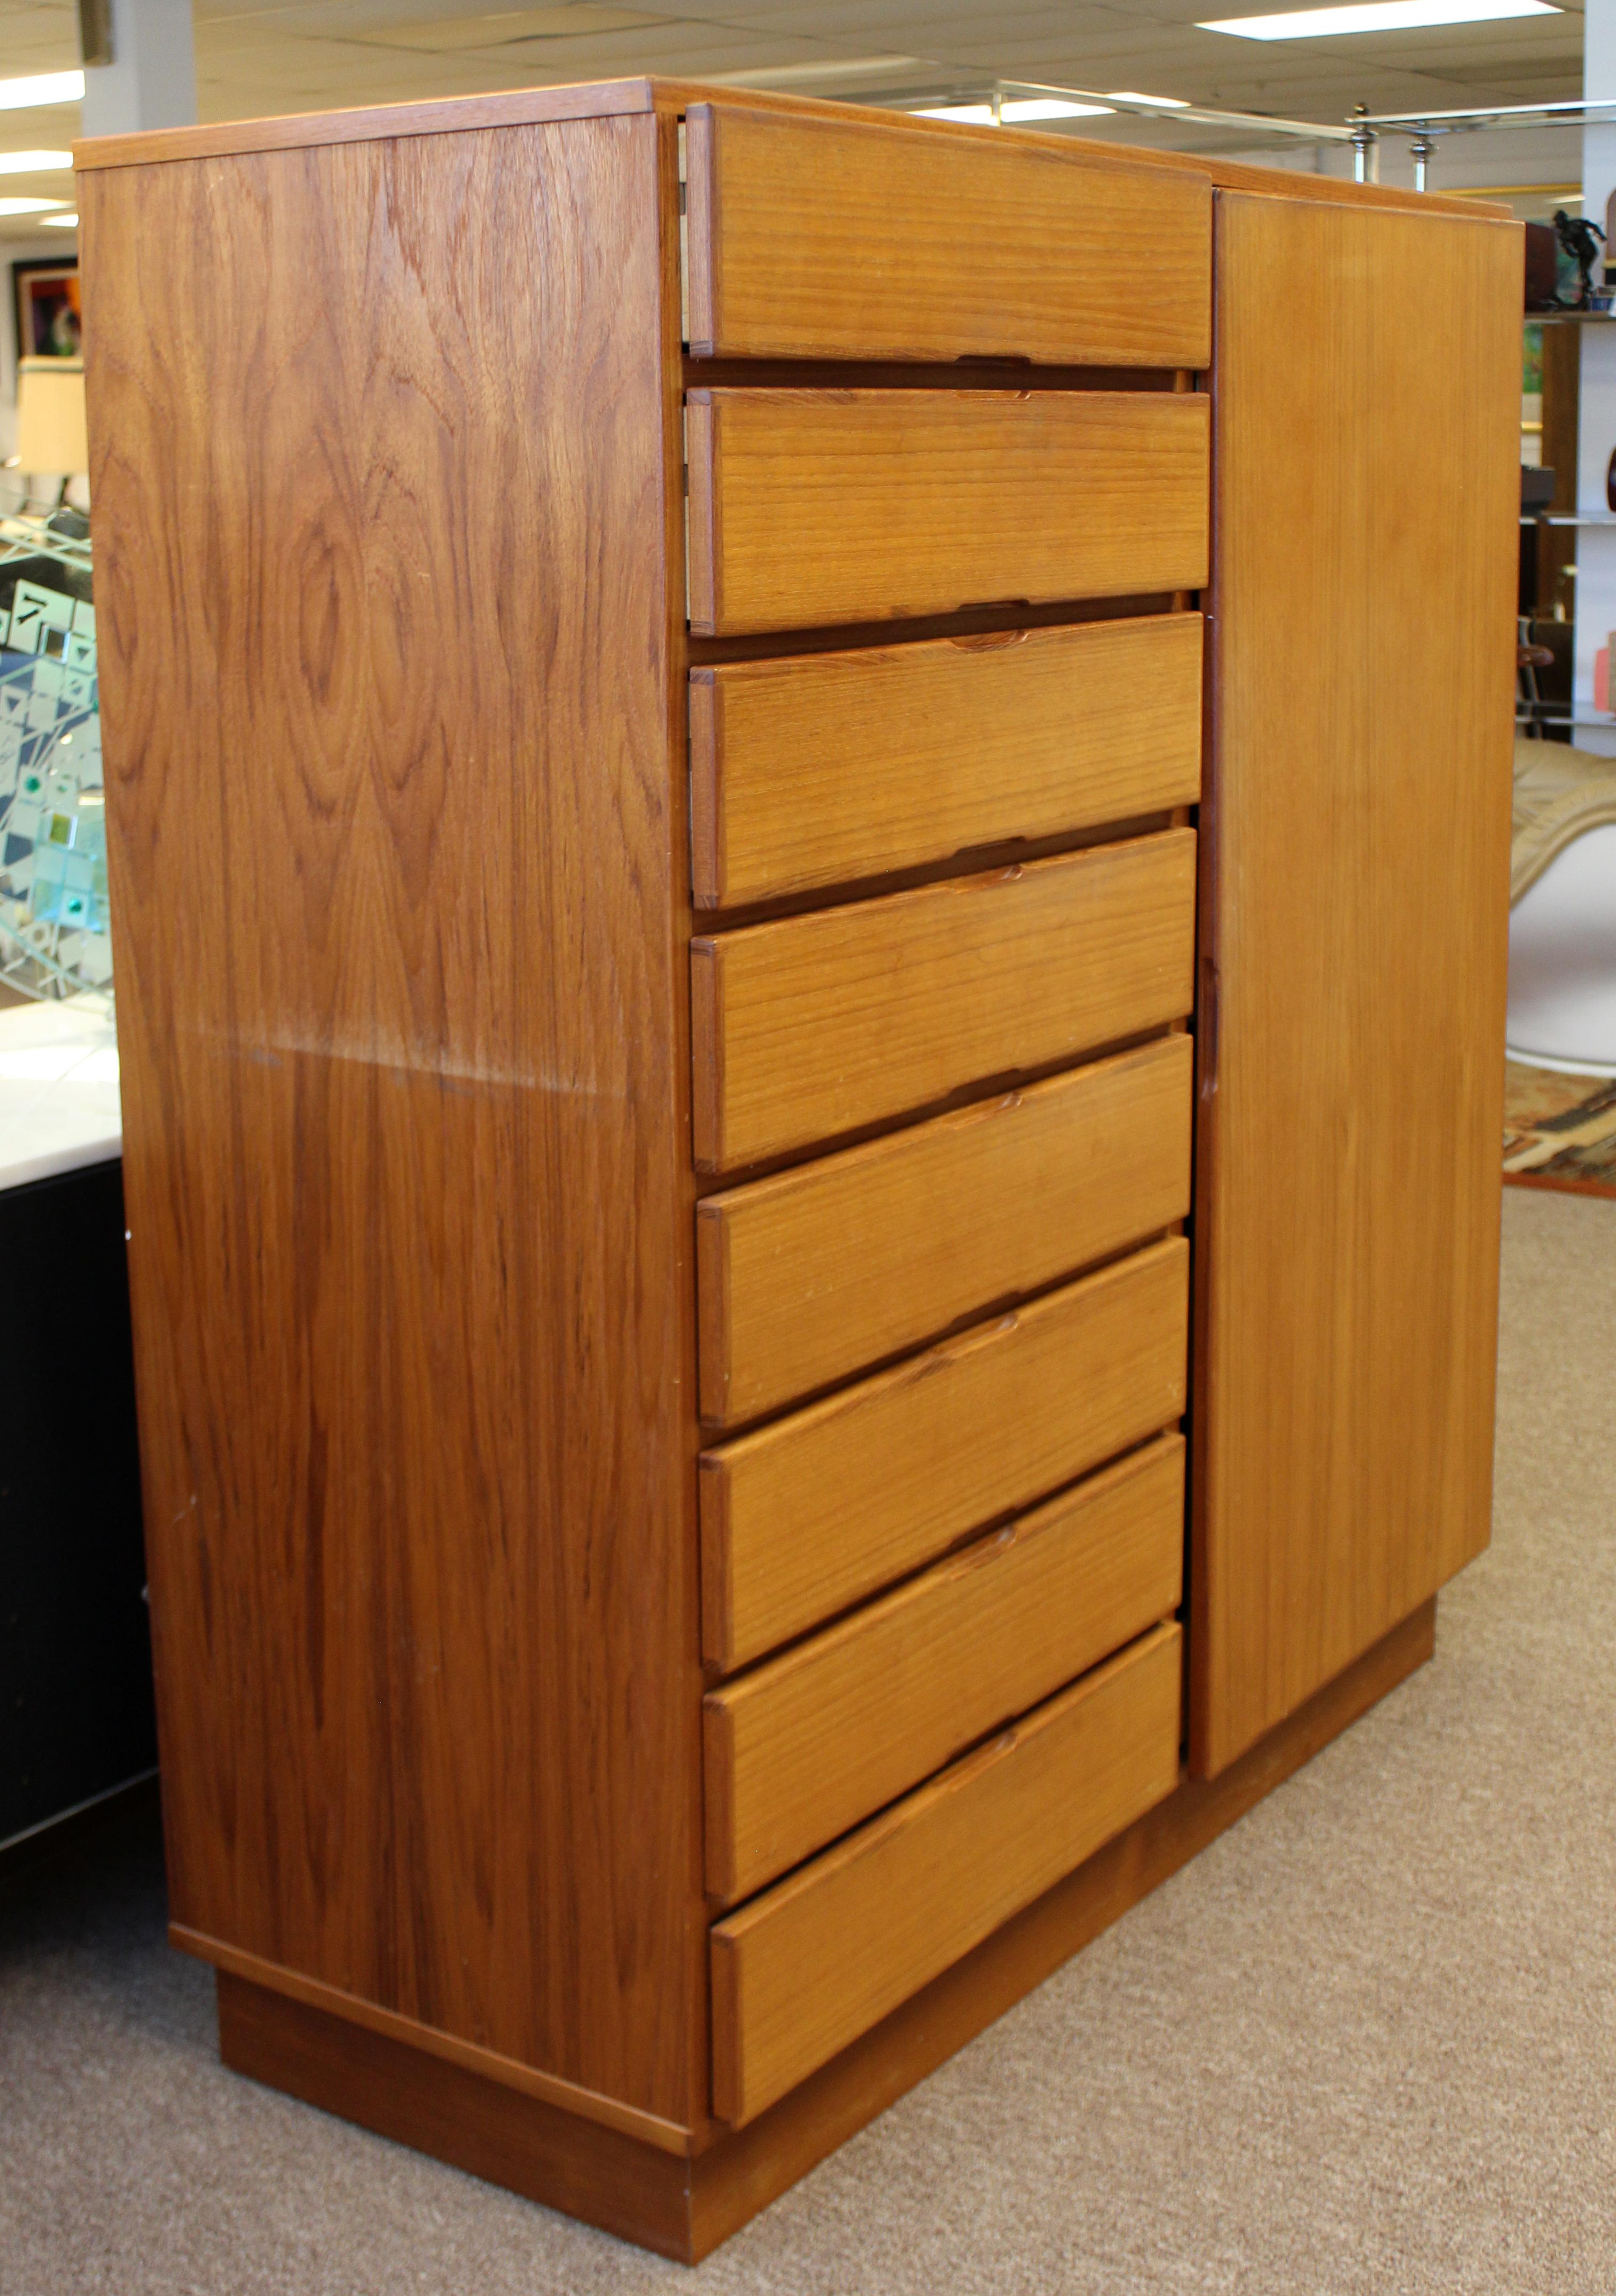 For your consideration is a wonderful, teak dresser, with ten drawers, made in Denmark, circa 1960s. In very good vintage condition, with a break in the wood near a hinge. The dimensions are 49